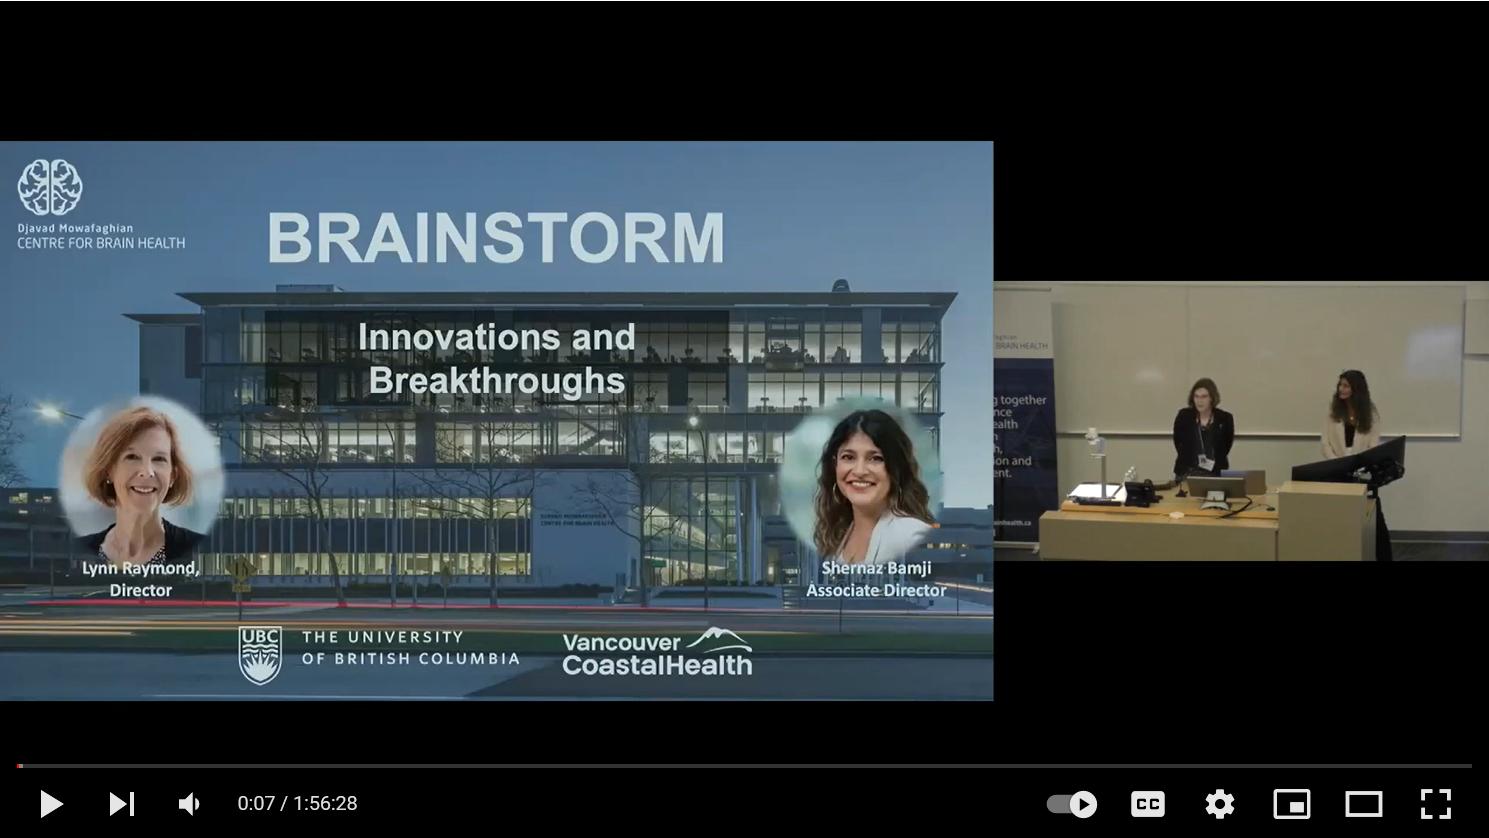 You are currently viewing Video: Djavad Mowafaghian Centre for Brain Health Brainstorm event